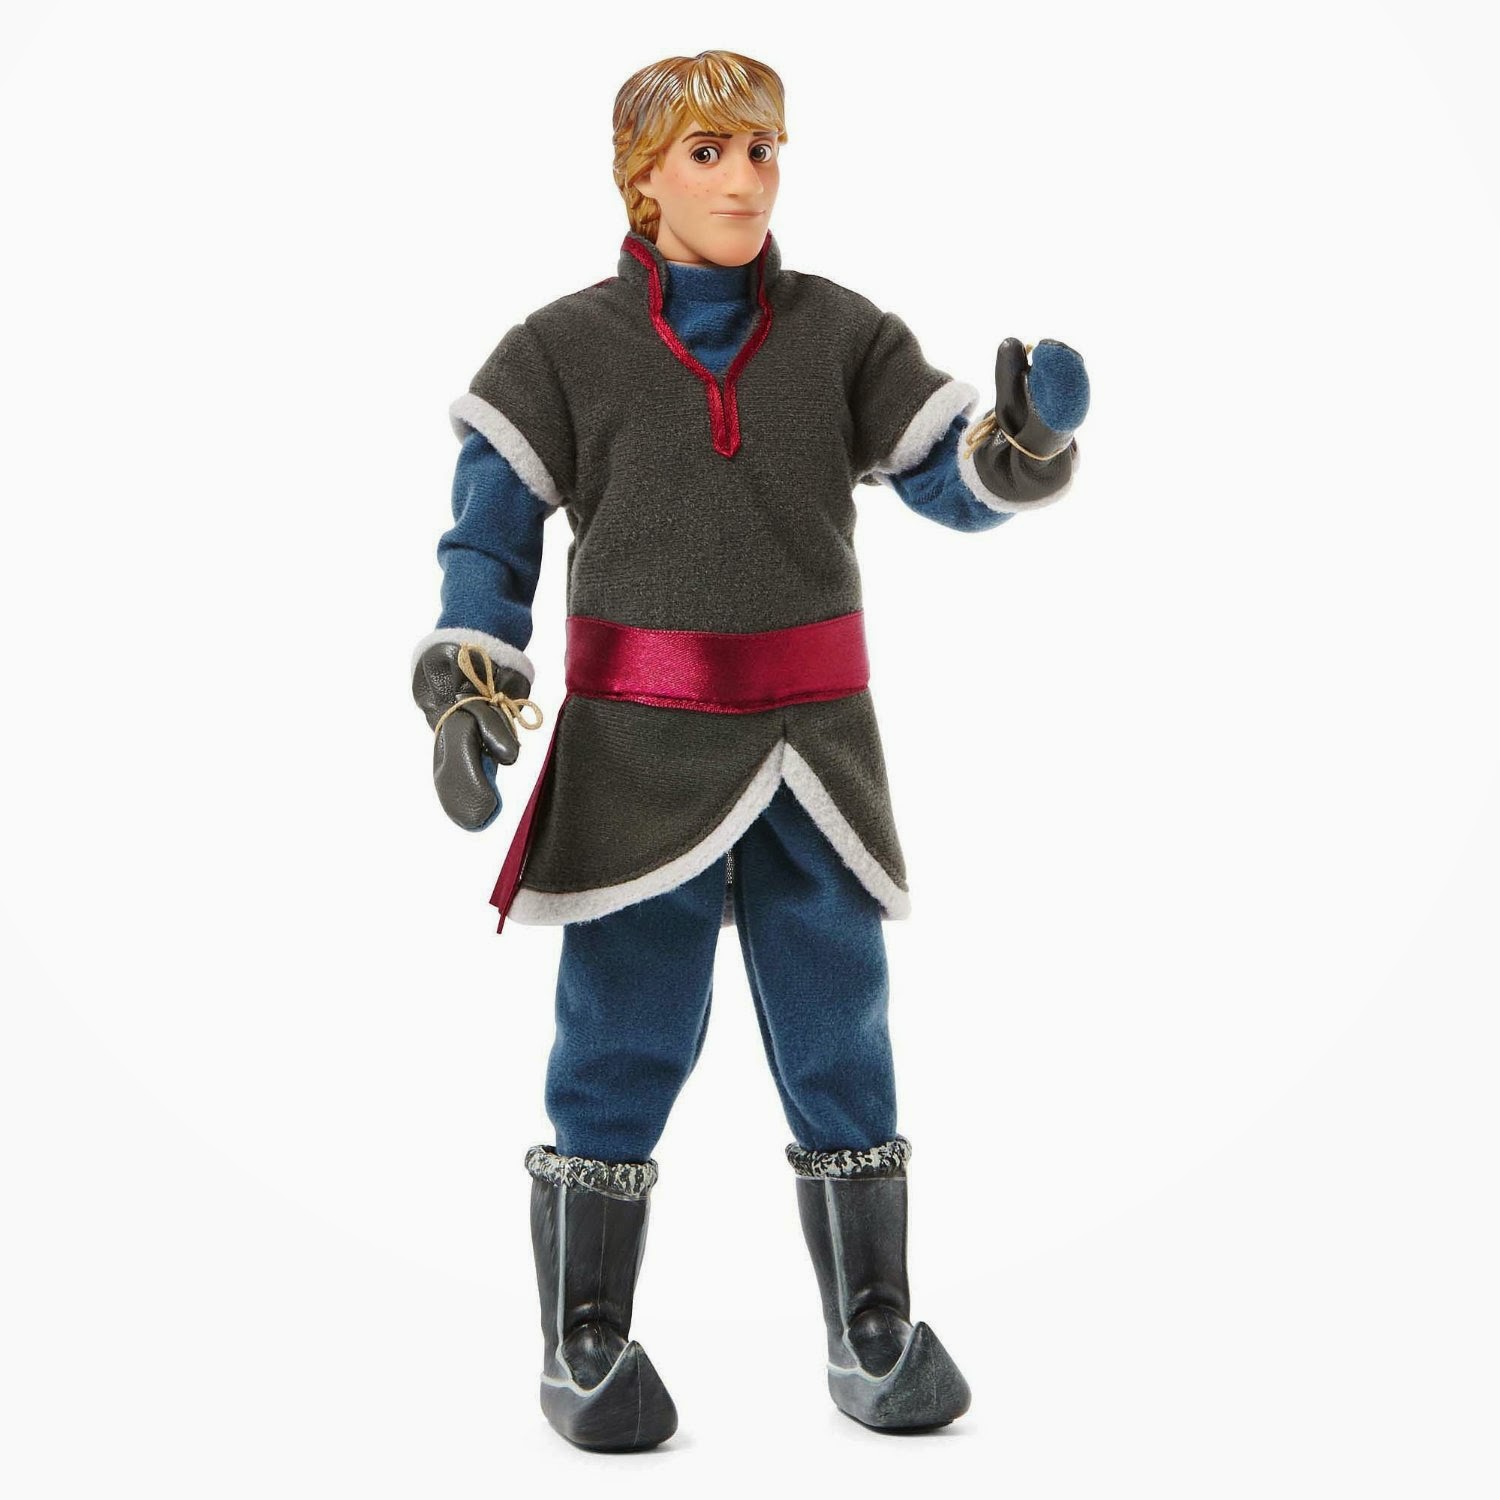 Disney FROZEN KRISTOFF 12-inch tall (nude) articulated 